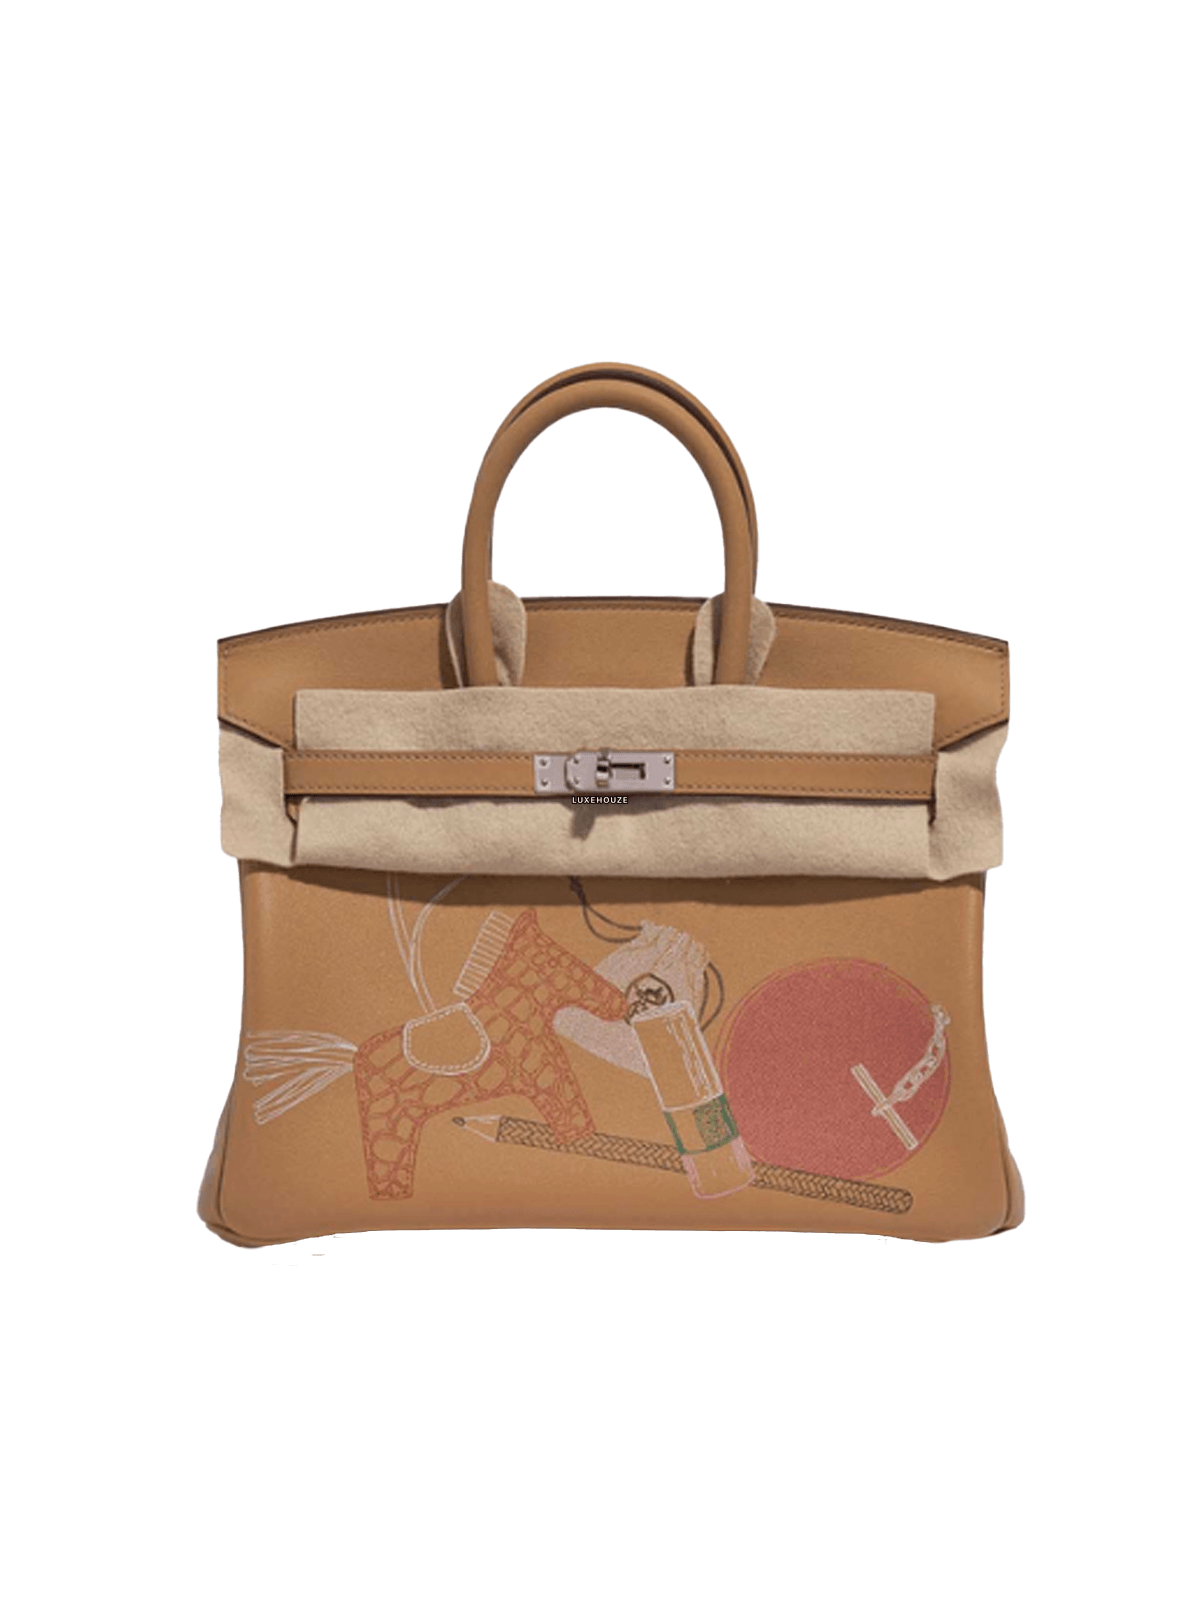 Hermes Birkin 30 3 in 1 Bag in Biscuit Togo, Swift, and Canvas with Gold Hardware